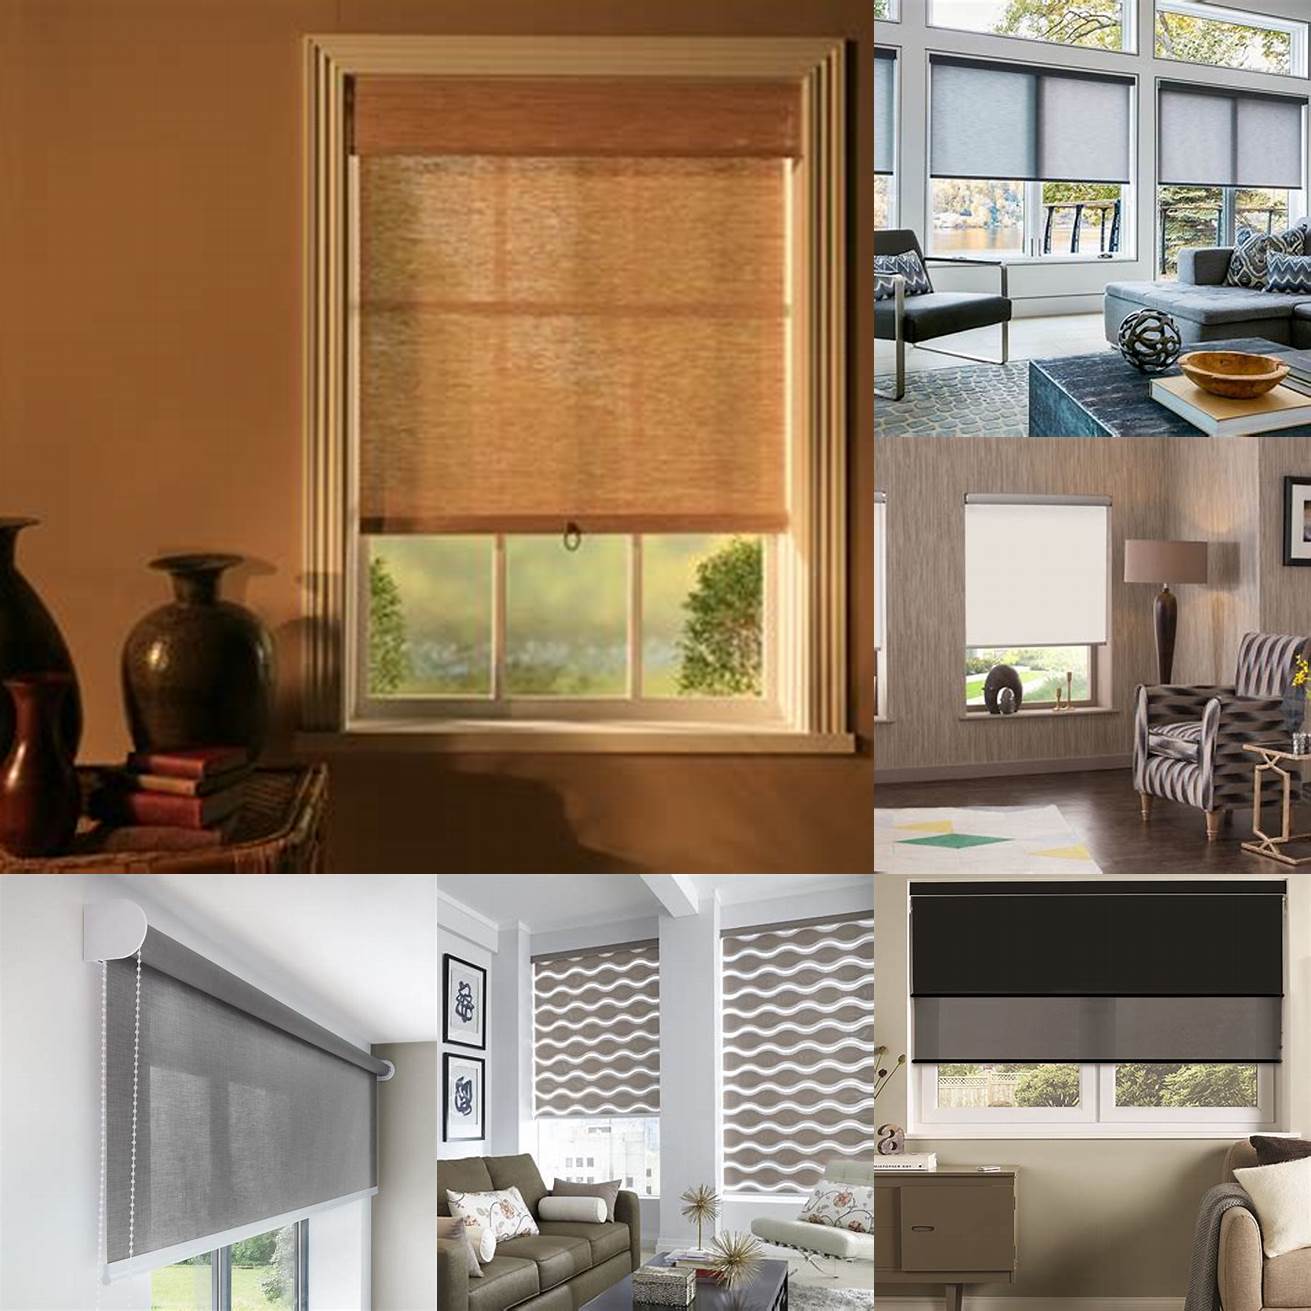 Price Roller blinds can be more expensive than other window treatments especially if you opt for high-quality materials or custom designs